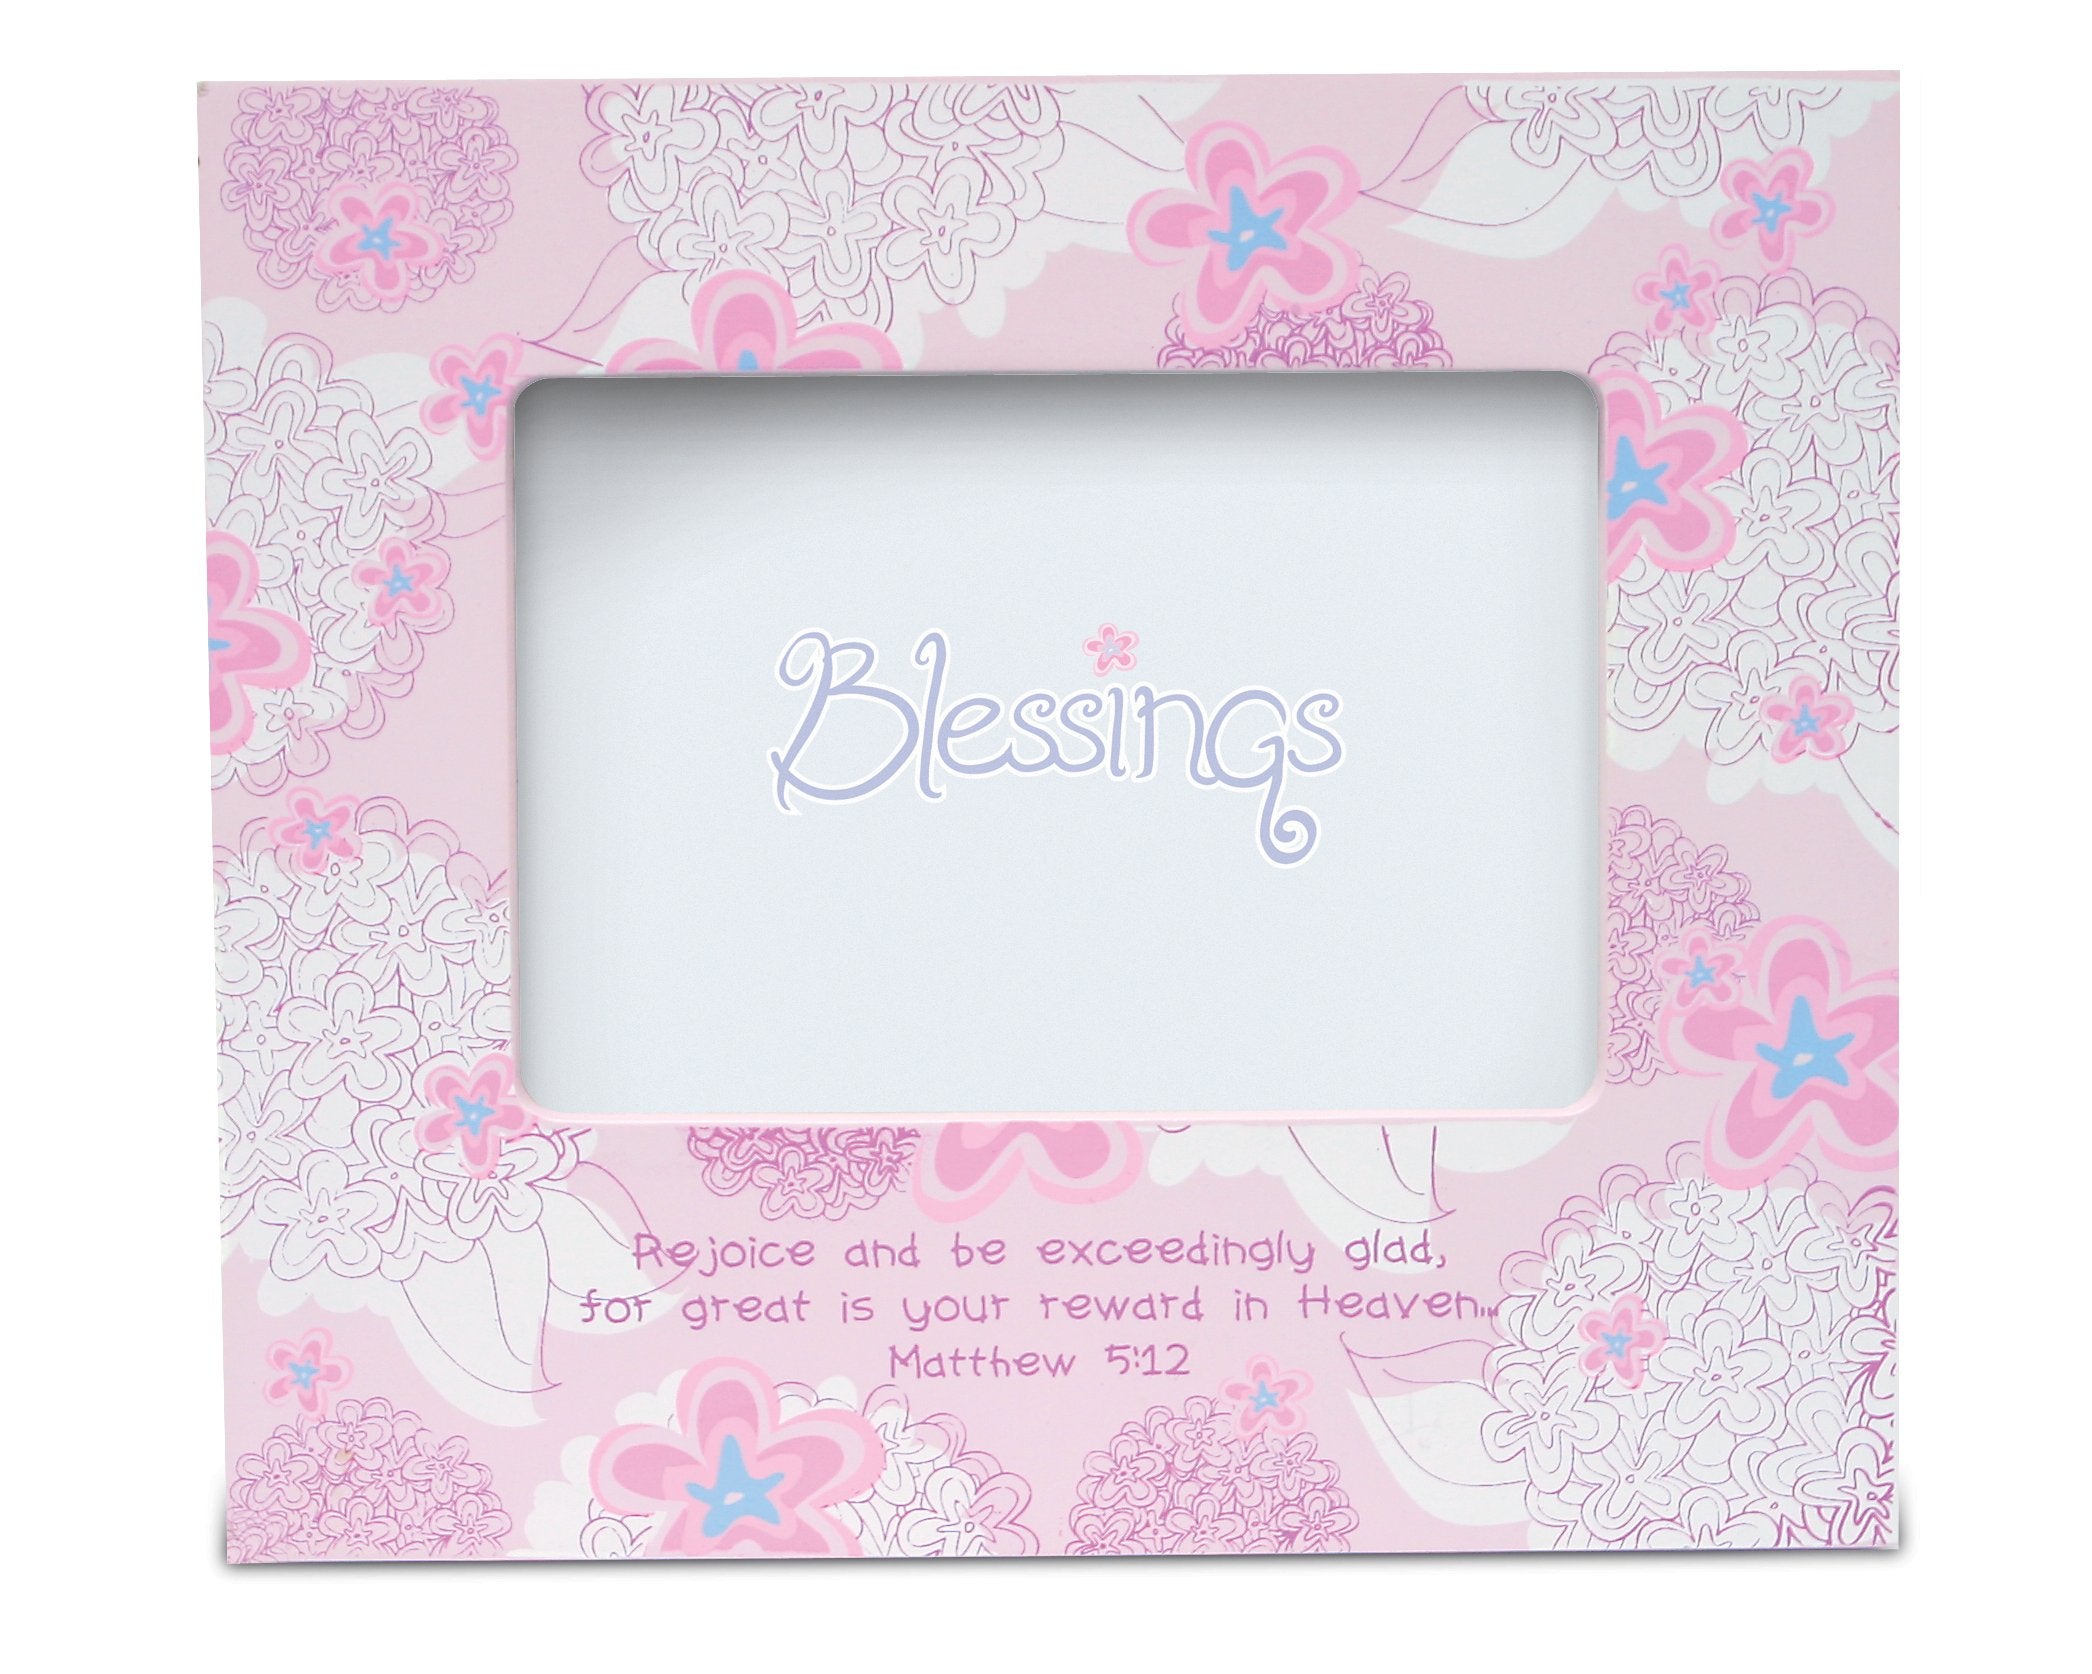 Divinity Boutique Blessings Wooden Photo Frame